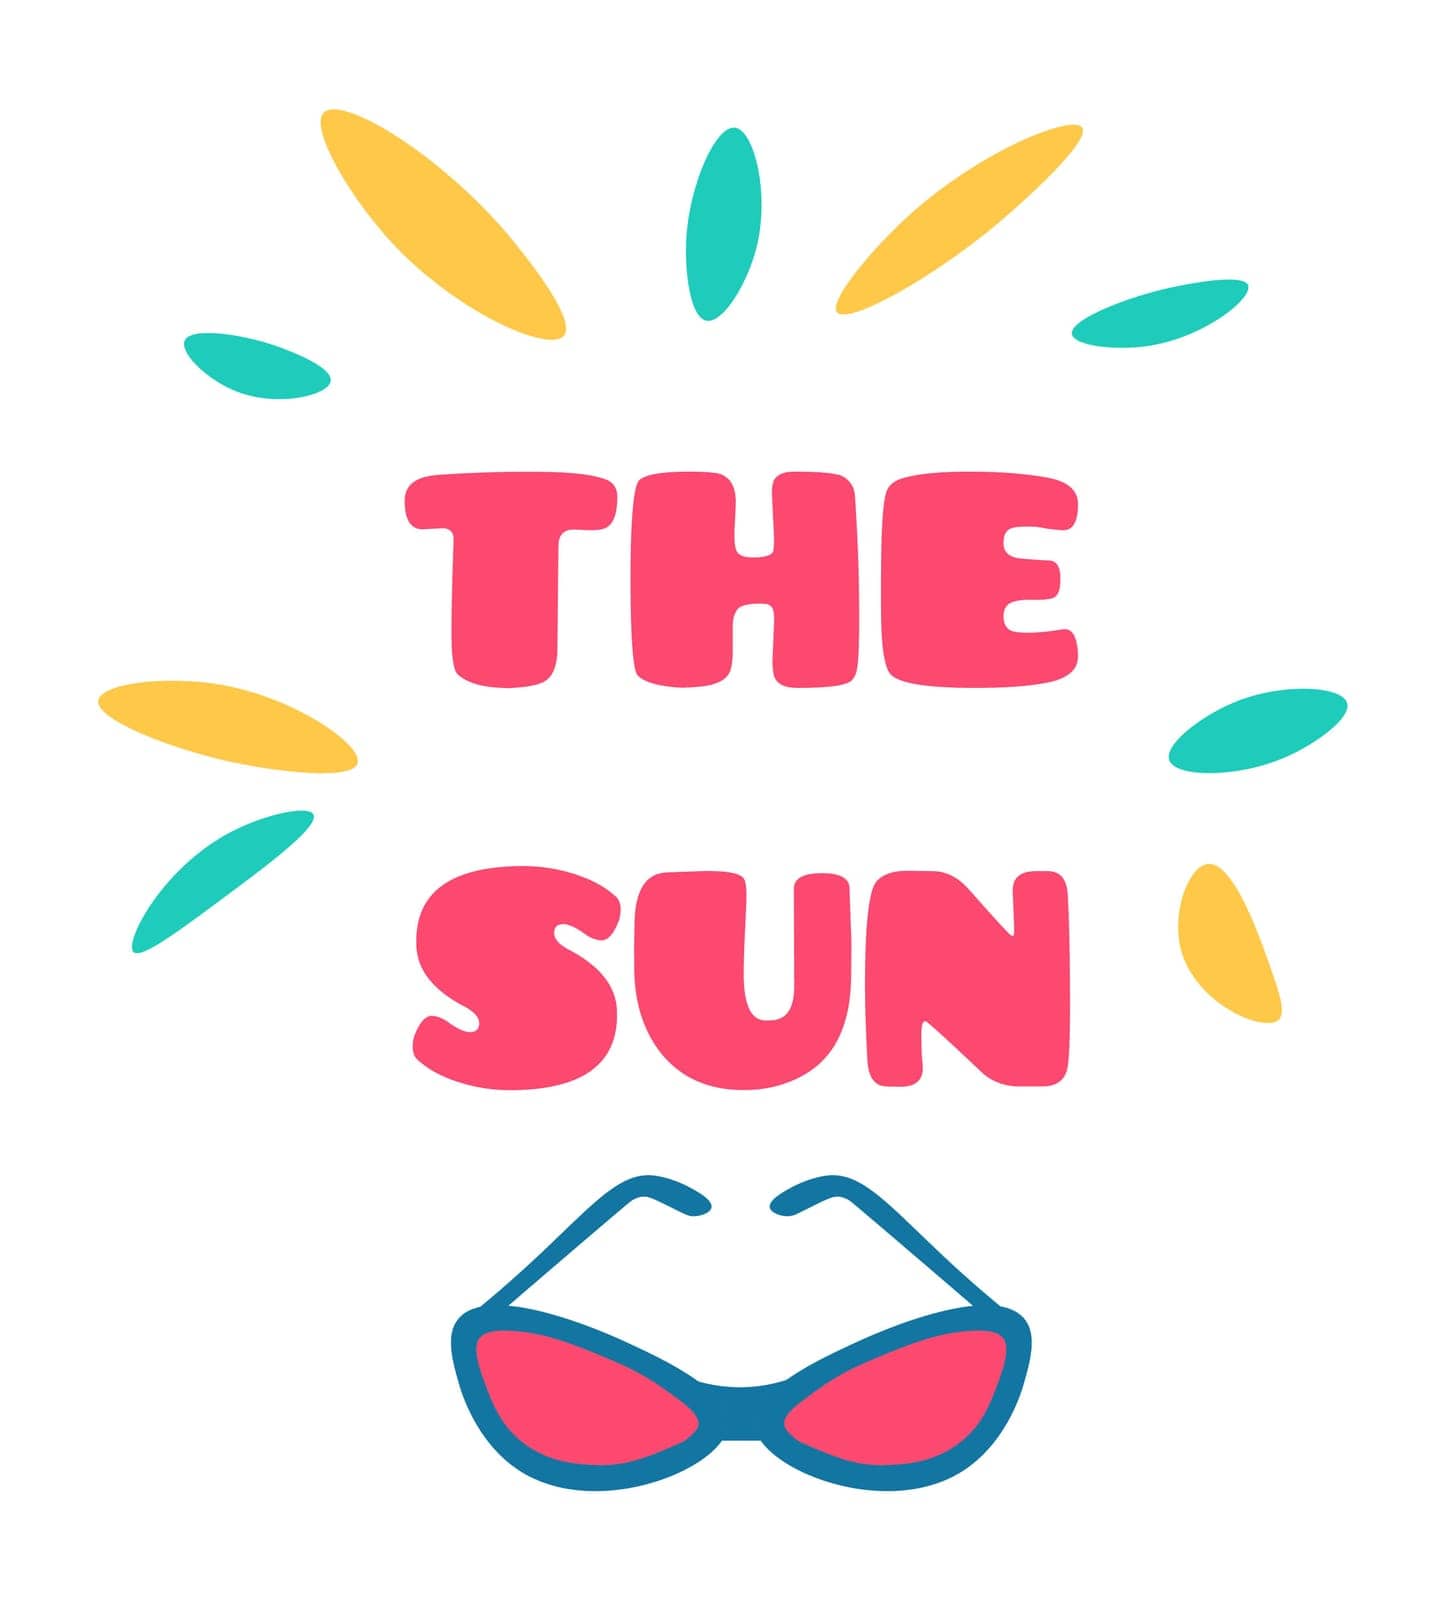 Sun sunglasses protecting eyes from sunshine, isolated decorative sticker. Stylish accessories for women and men, classic view and look for outfit. Season beach vacation. Vector in flat style